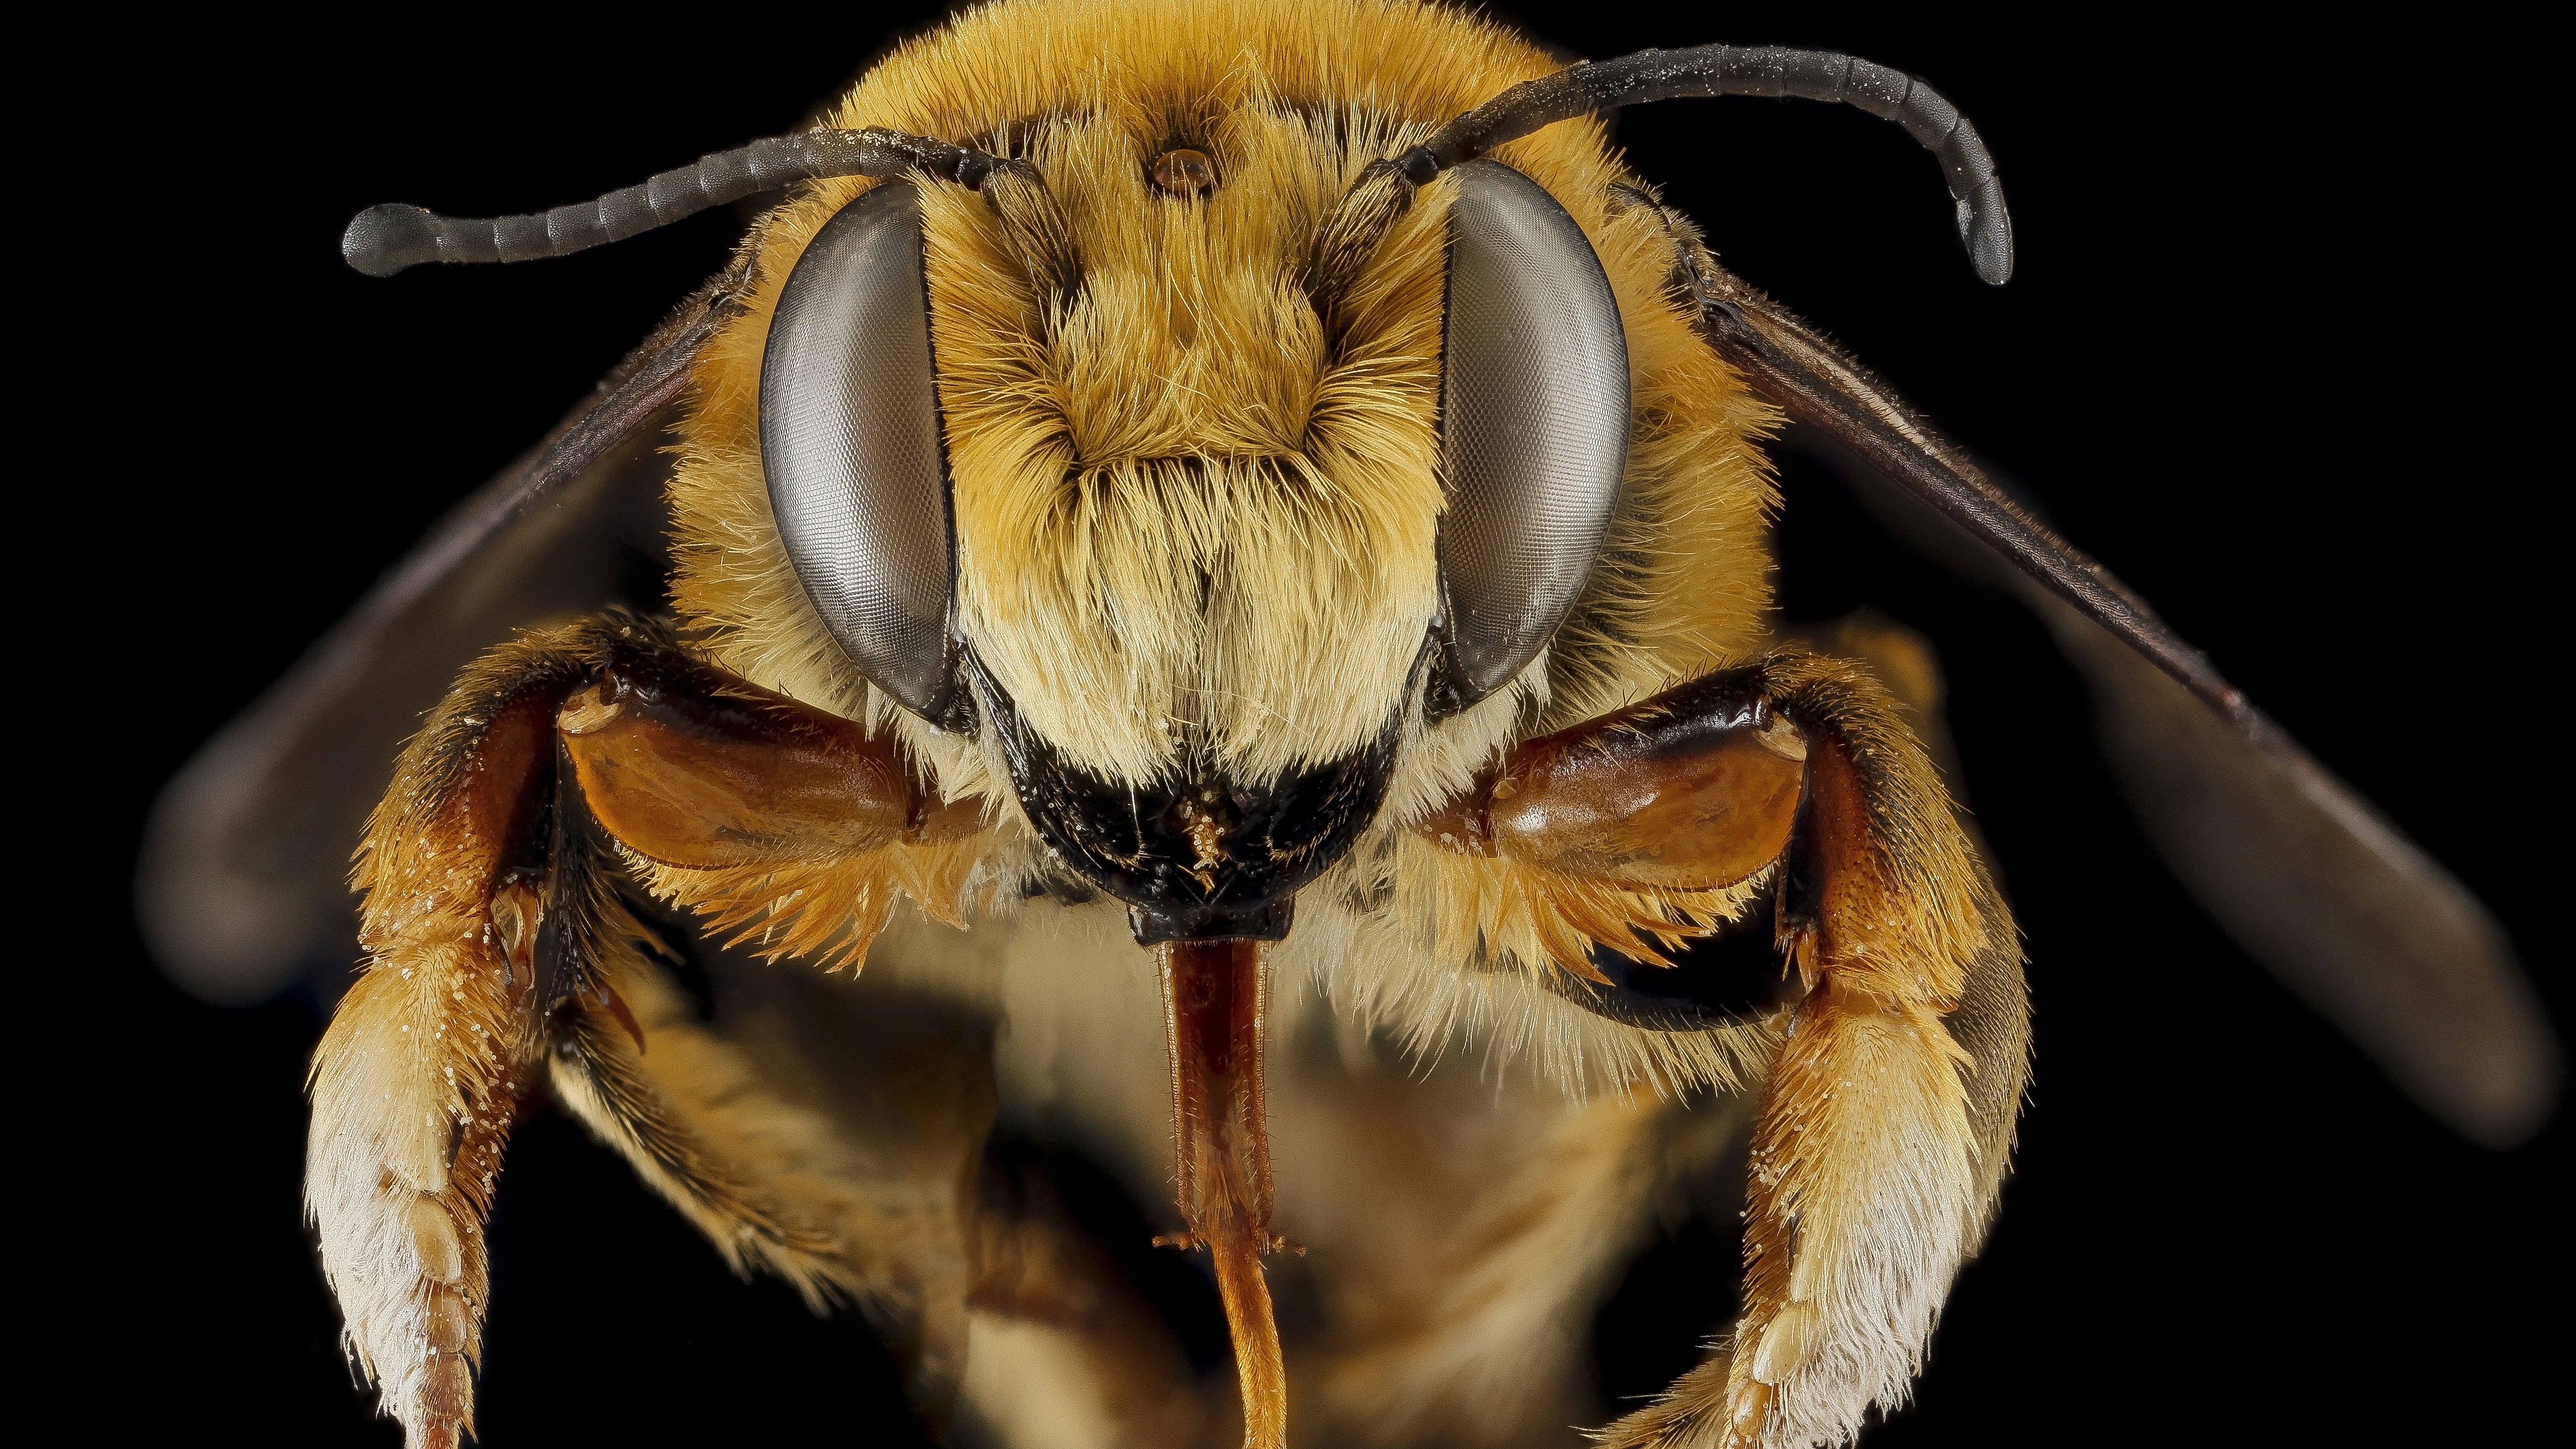 General 5150x2896 nature macro insect tentacles legs depth of field eyes bees black background wings animals